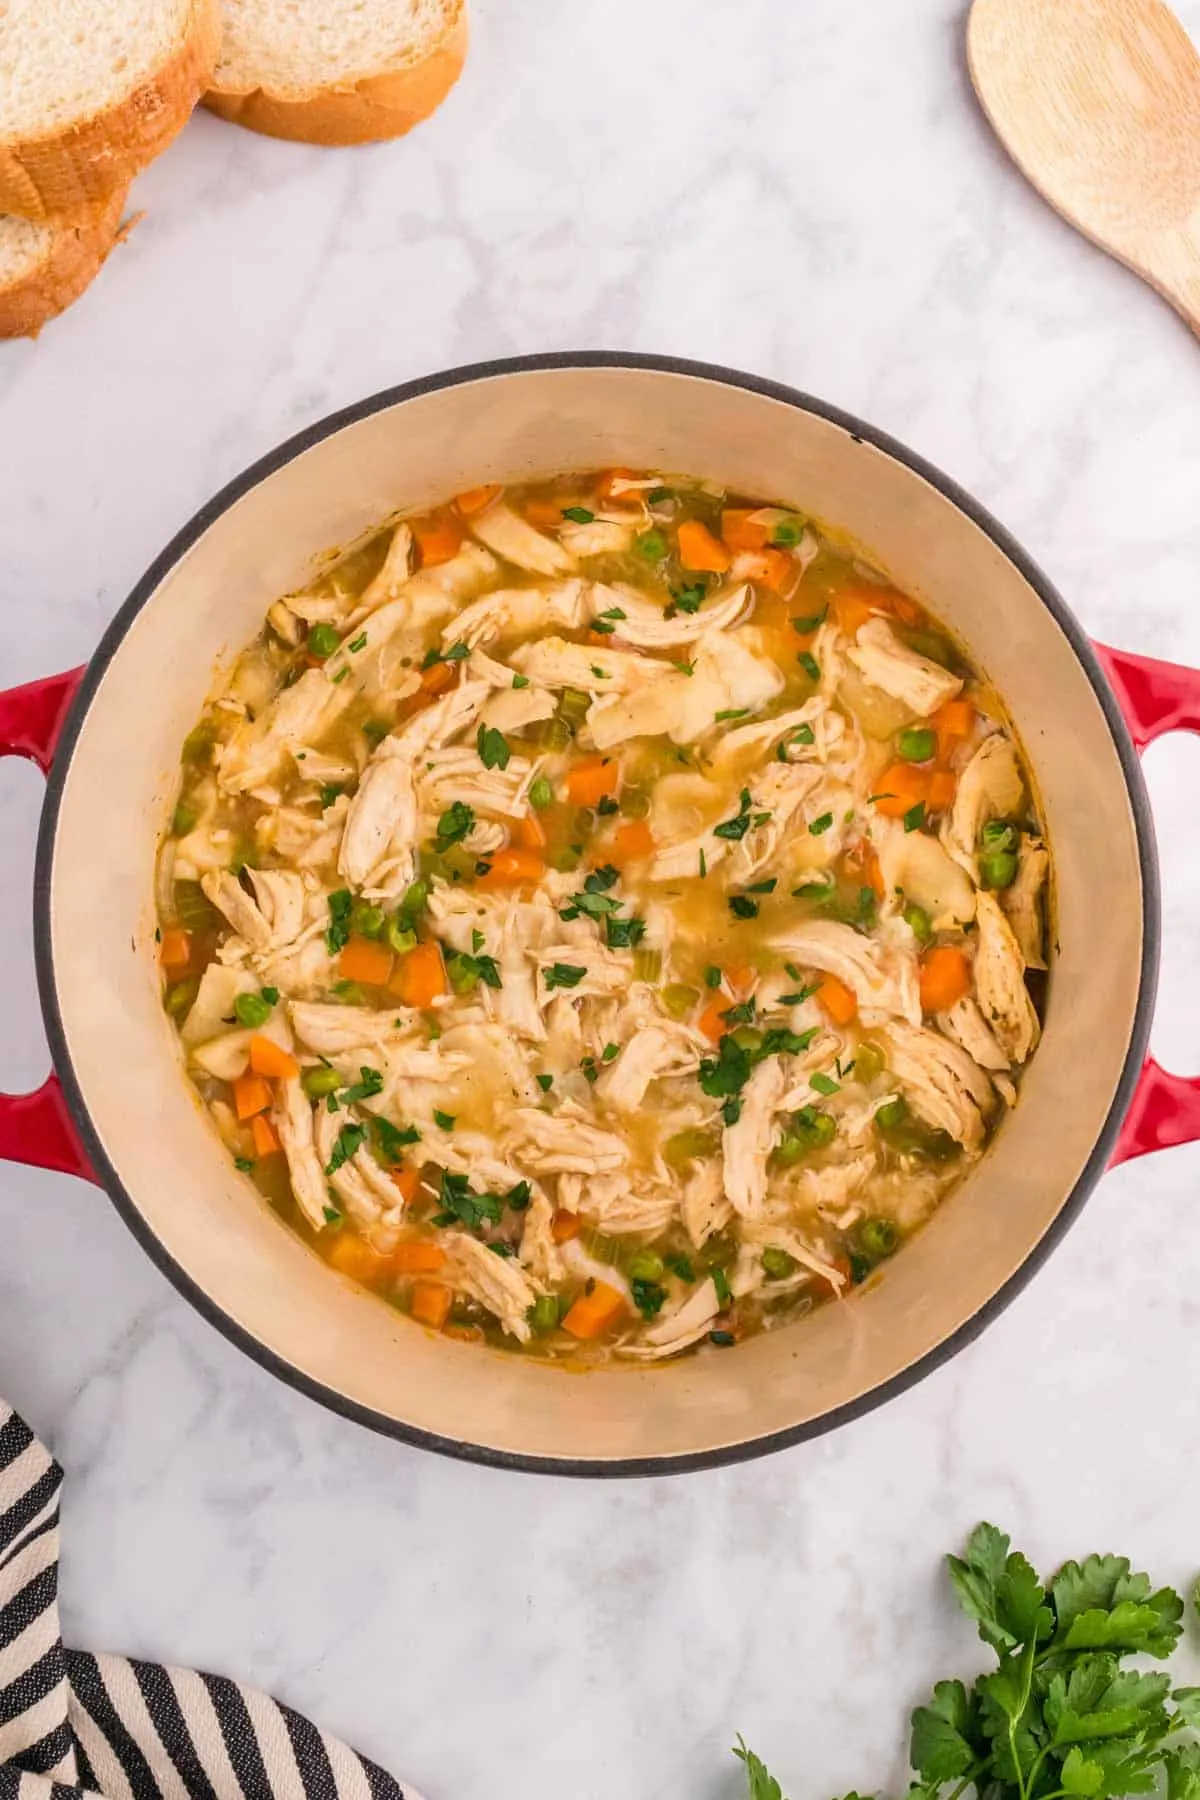 Chicken and Dumplings with Tortillas is a twist on a classic comfort food recipe loaded with shredded chicken breast, carrots, celery, onion, peas and flour tortilla recipes all cooked in a delicious chicken broth.